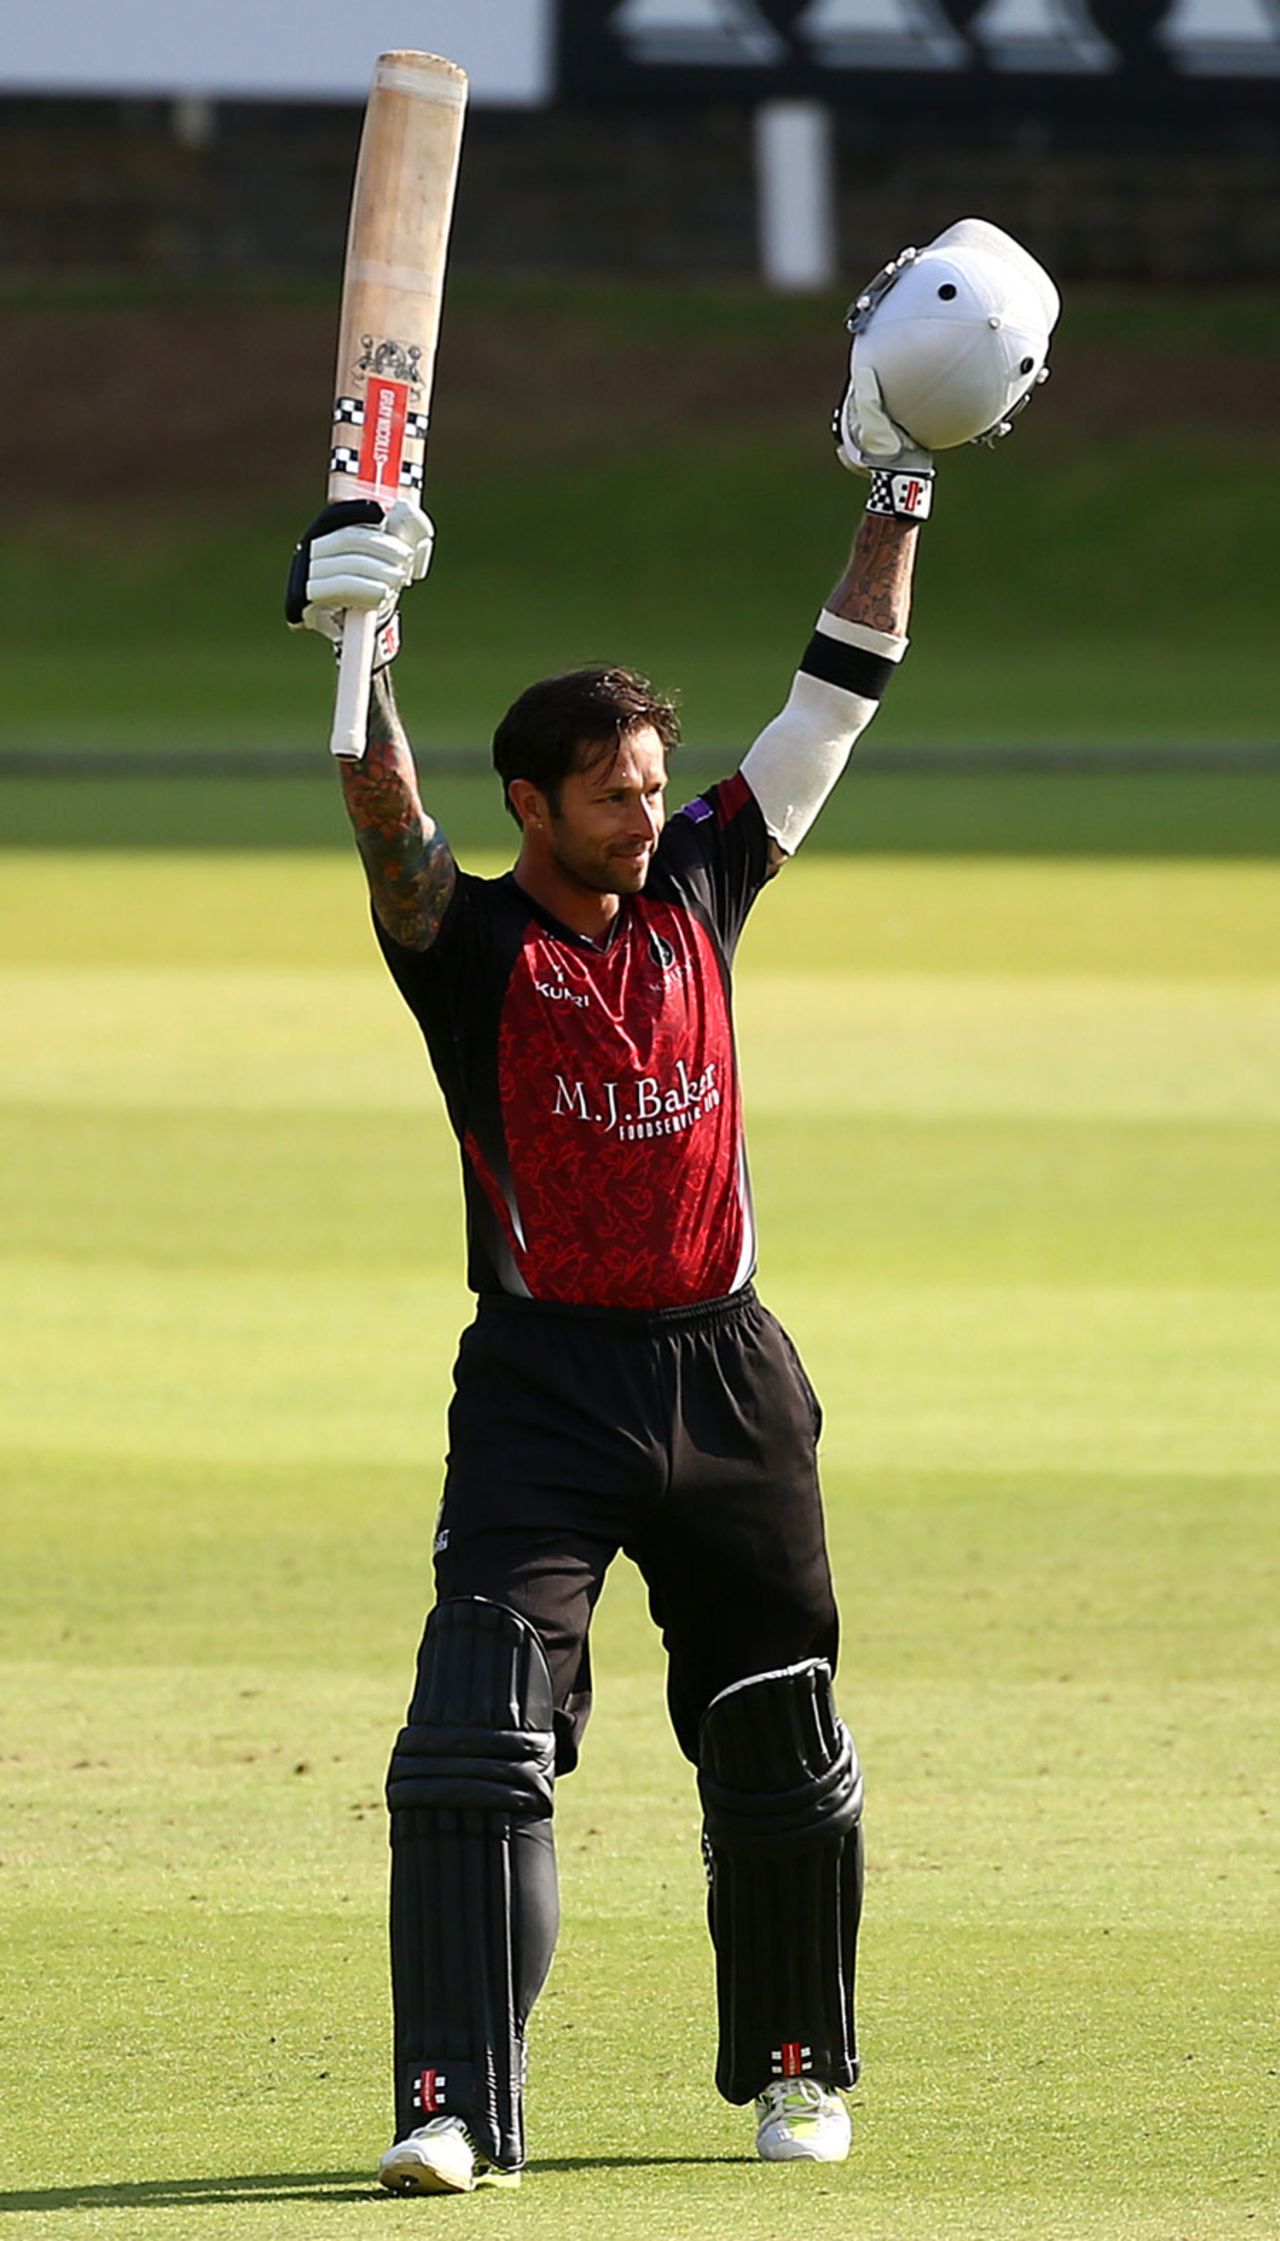 Peter Trego scored a match-winning hundred, Middlesex v Somerset, Royal London Cup, Lord's, August 7, 2014